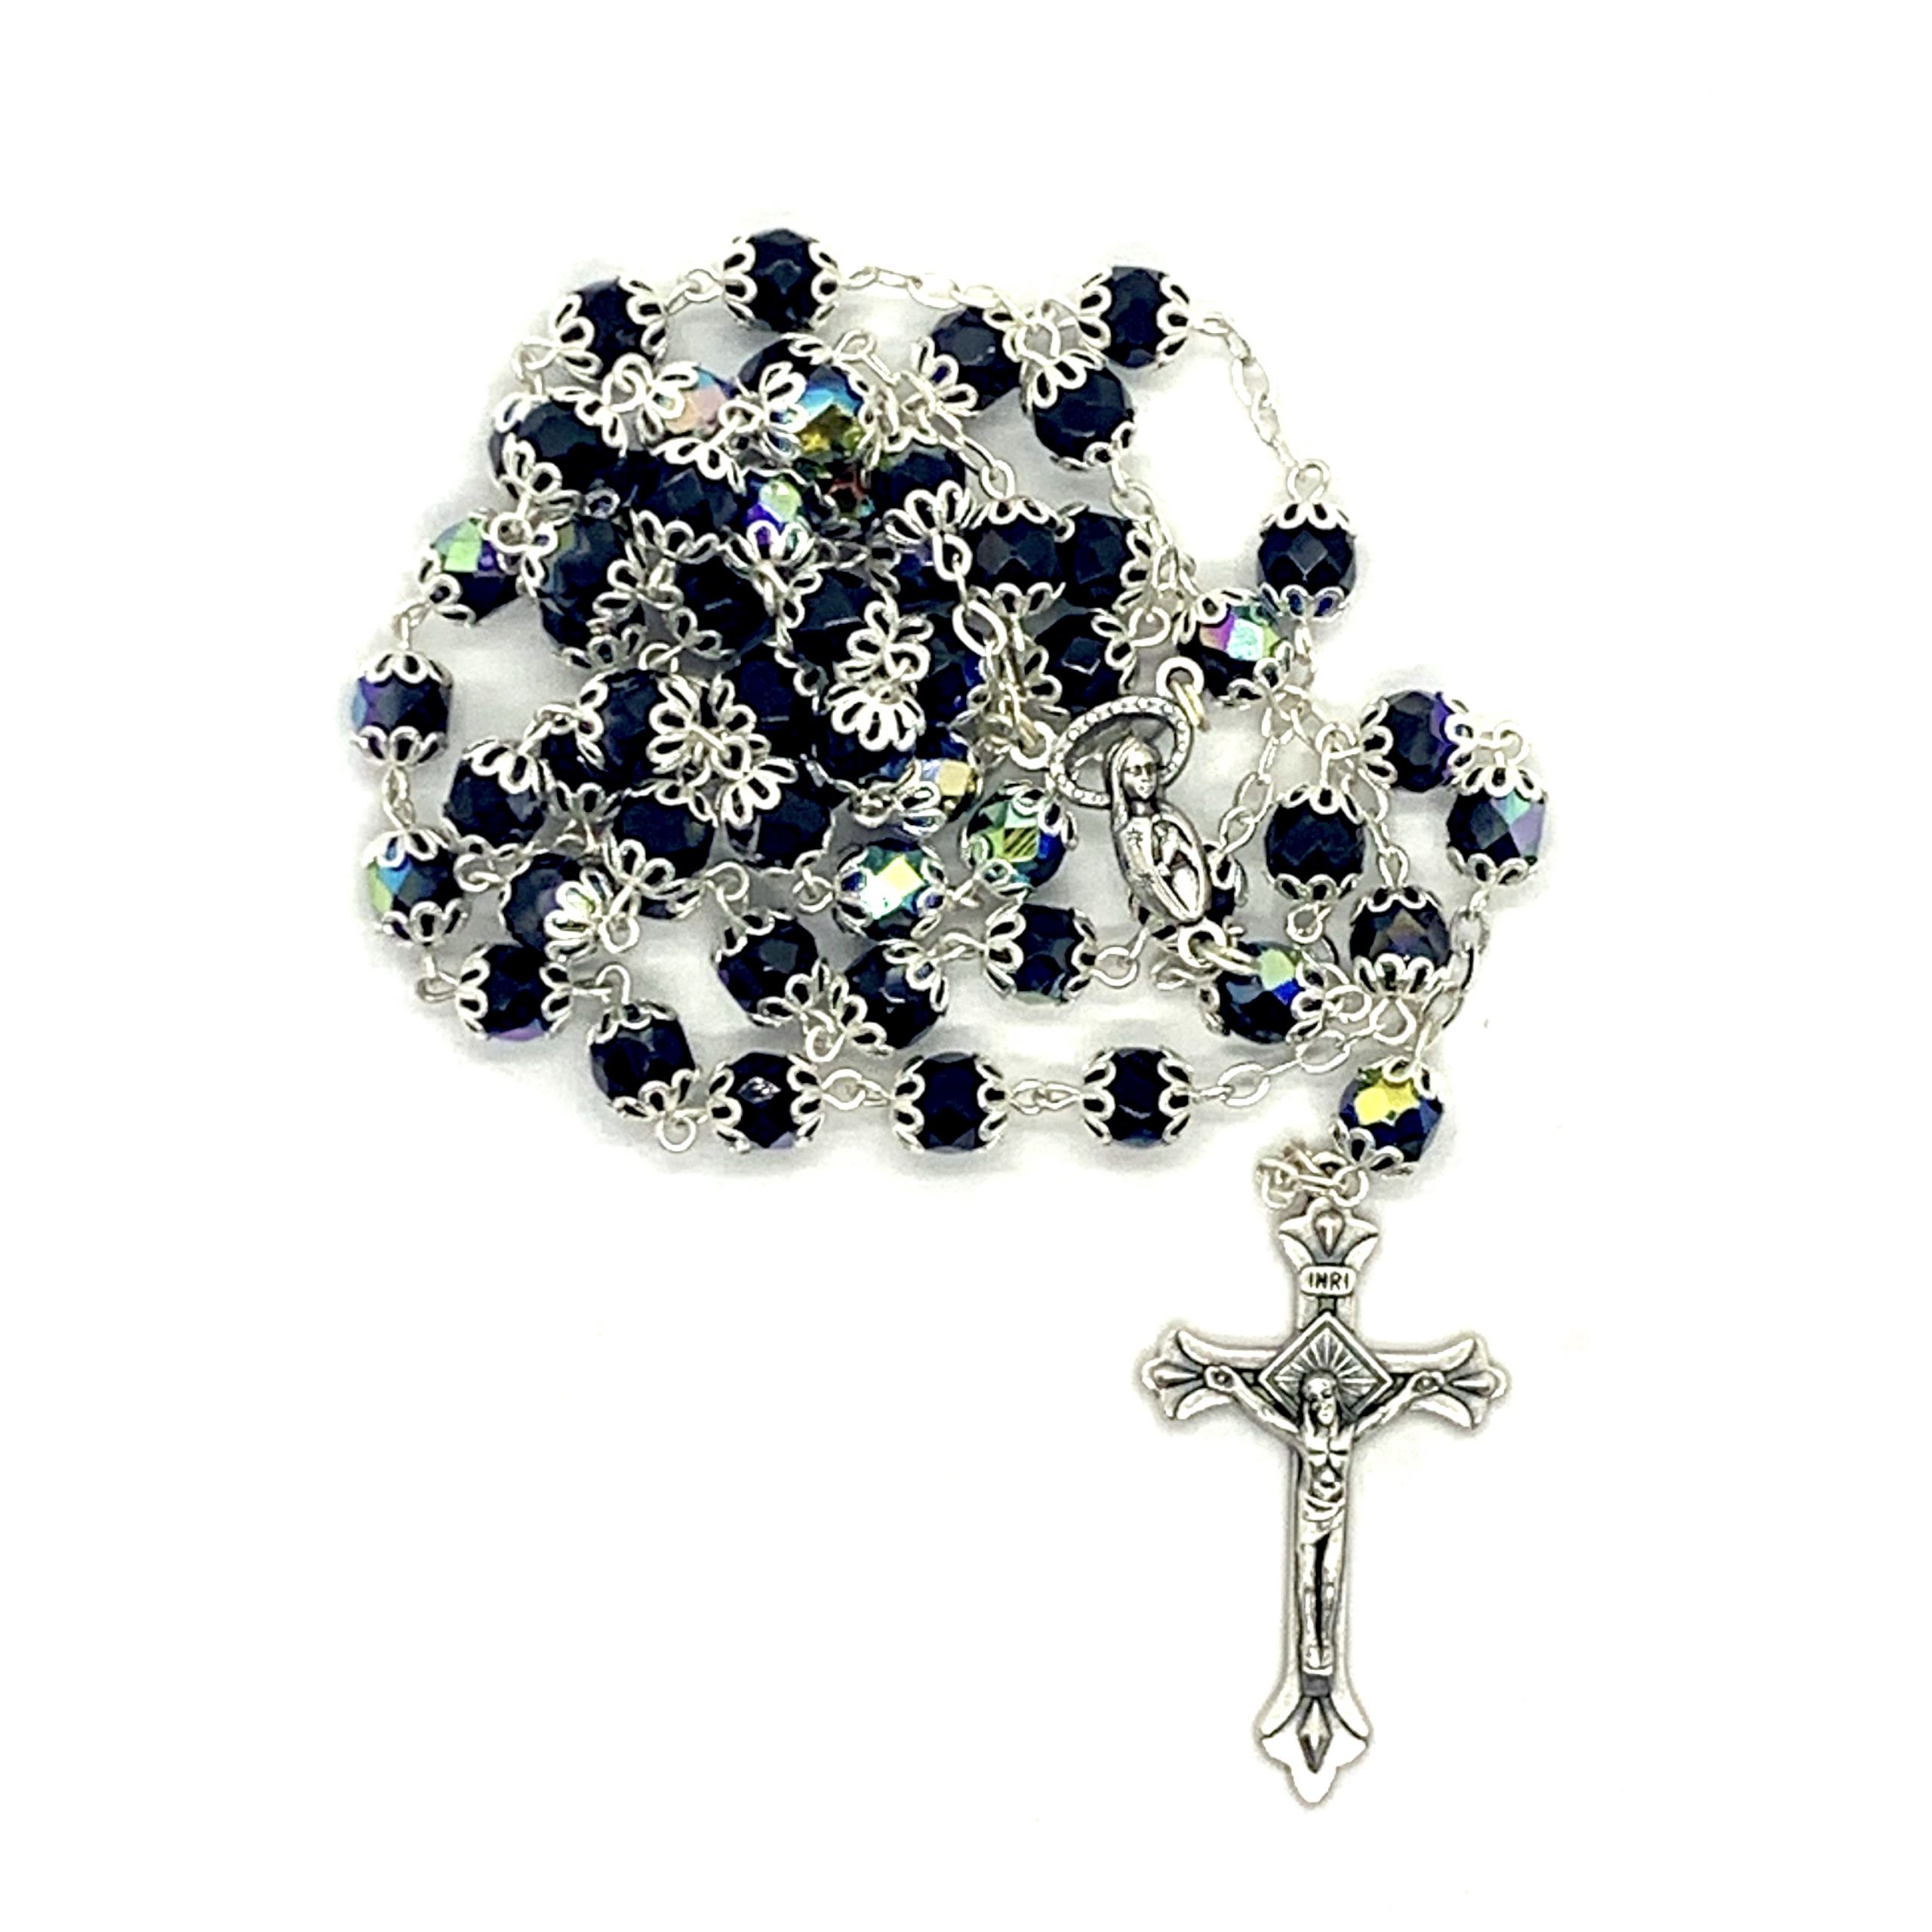 Chrystal Rosary Dark Blue with Silver Caps